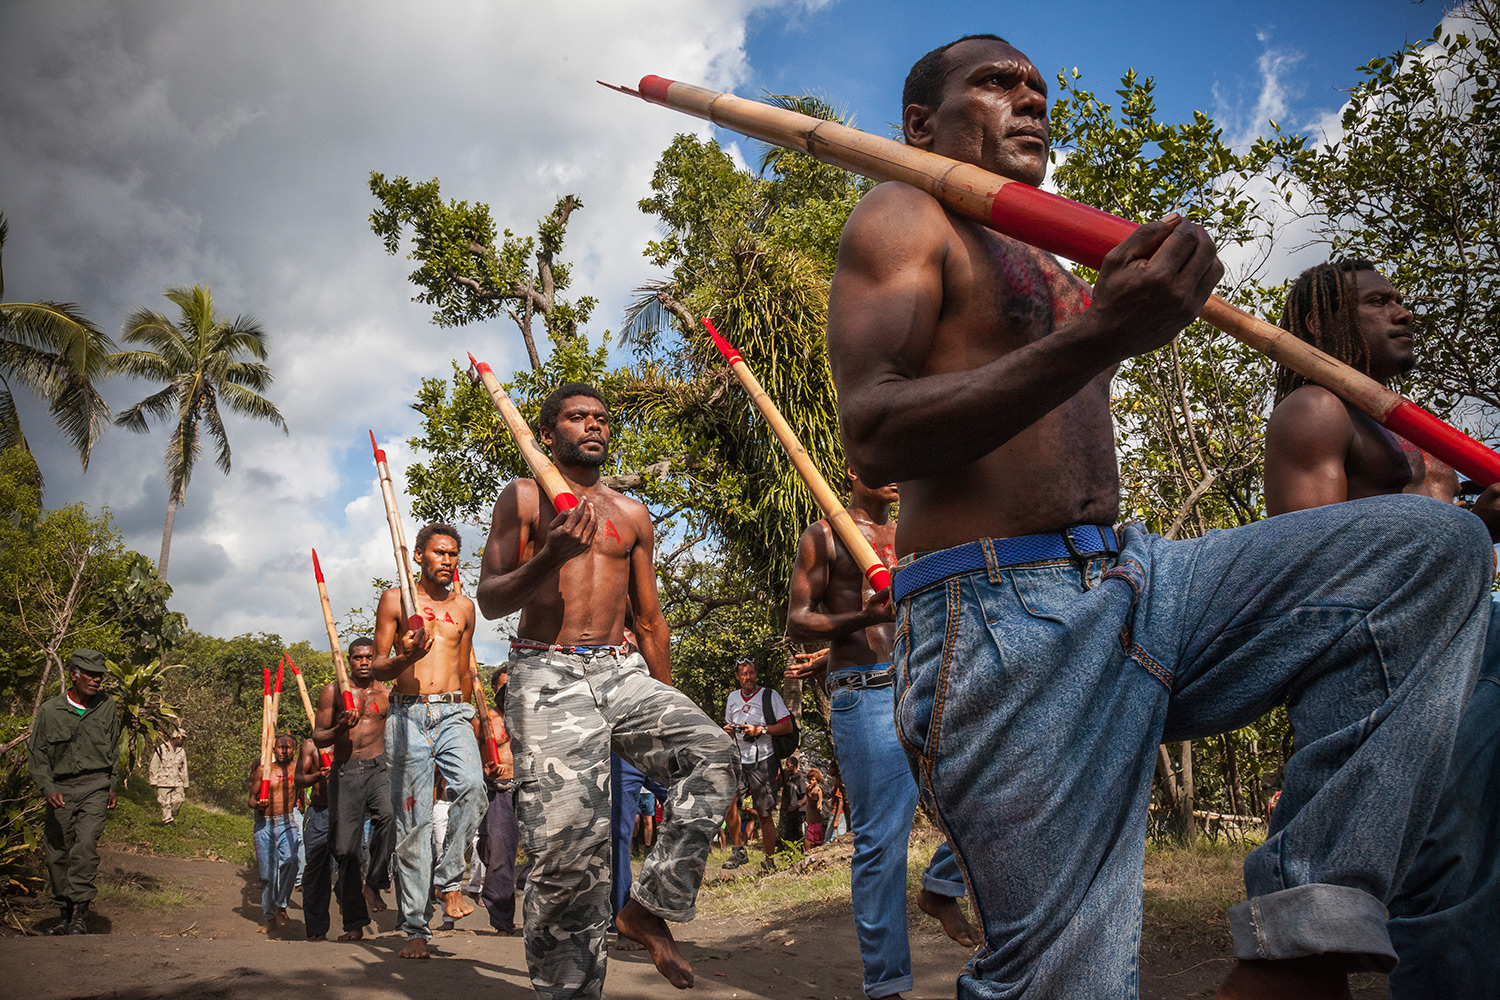 Cargo cult members march with bamboo "rifles" during the celebration of John Frum's Day in Lamakara village.